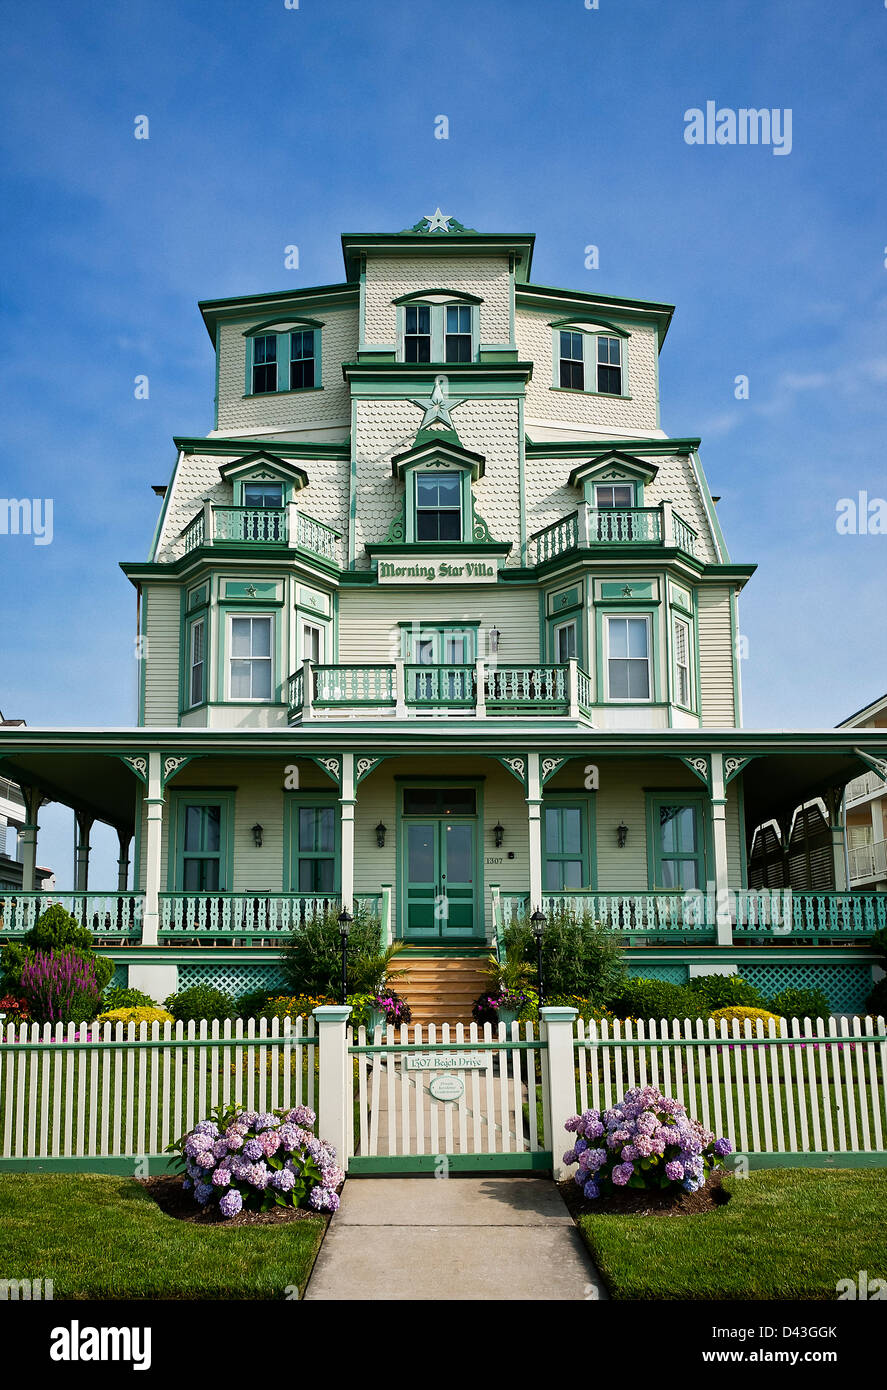 Grand victorian Beach house, Cape May, New Jersey, USA Banque D'Images